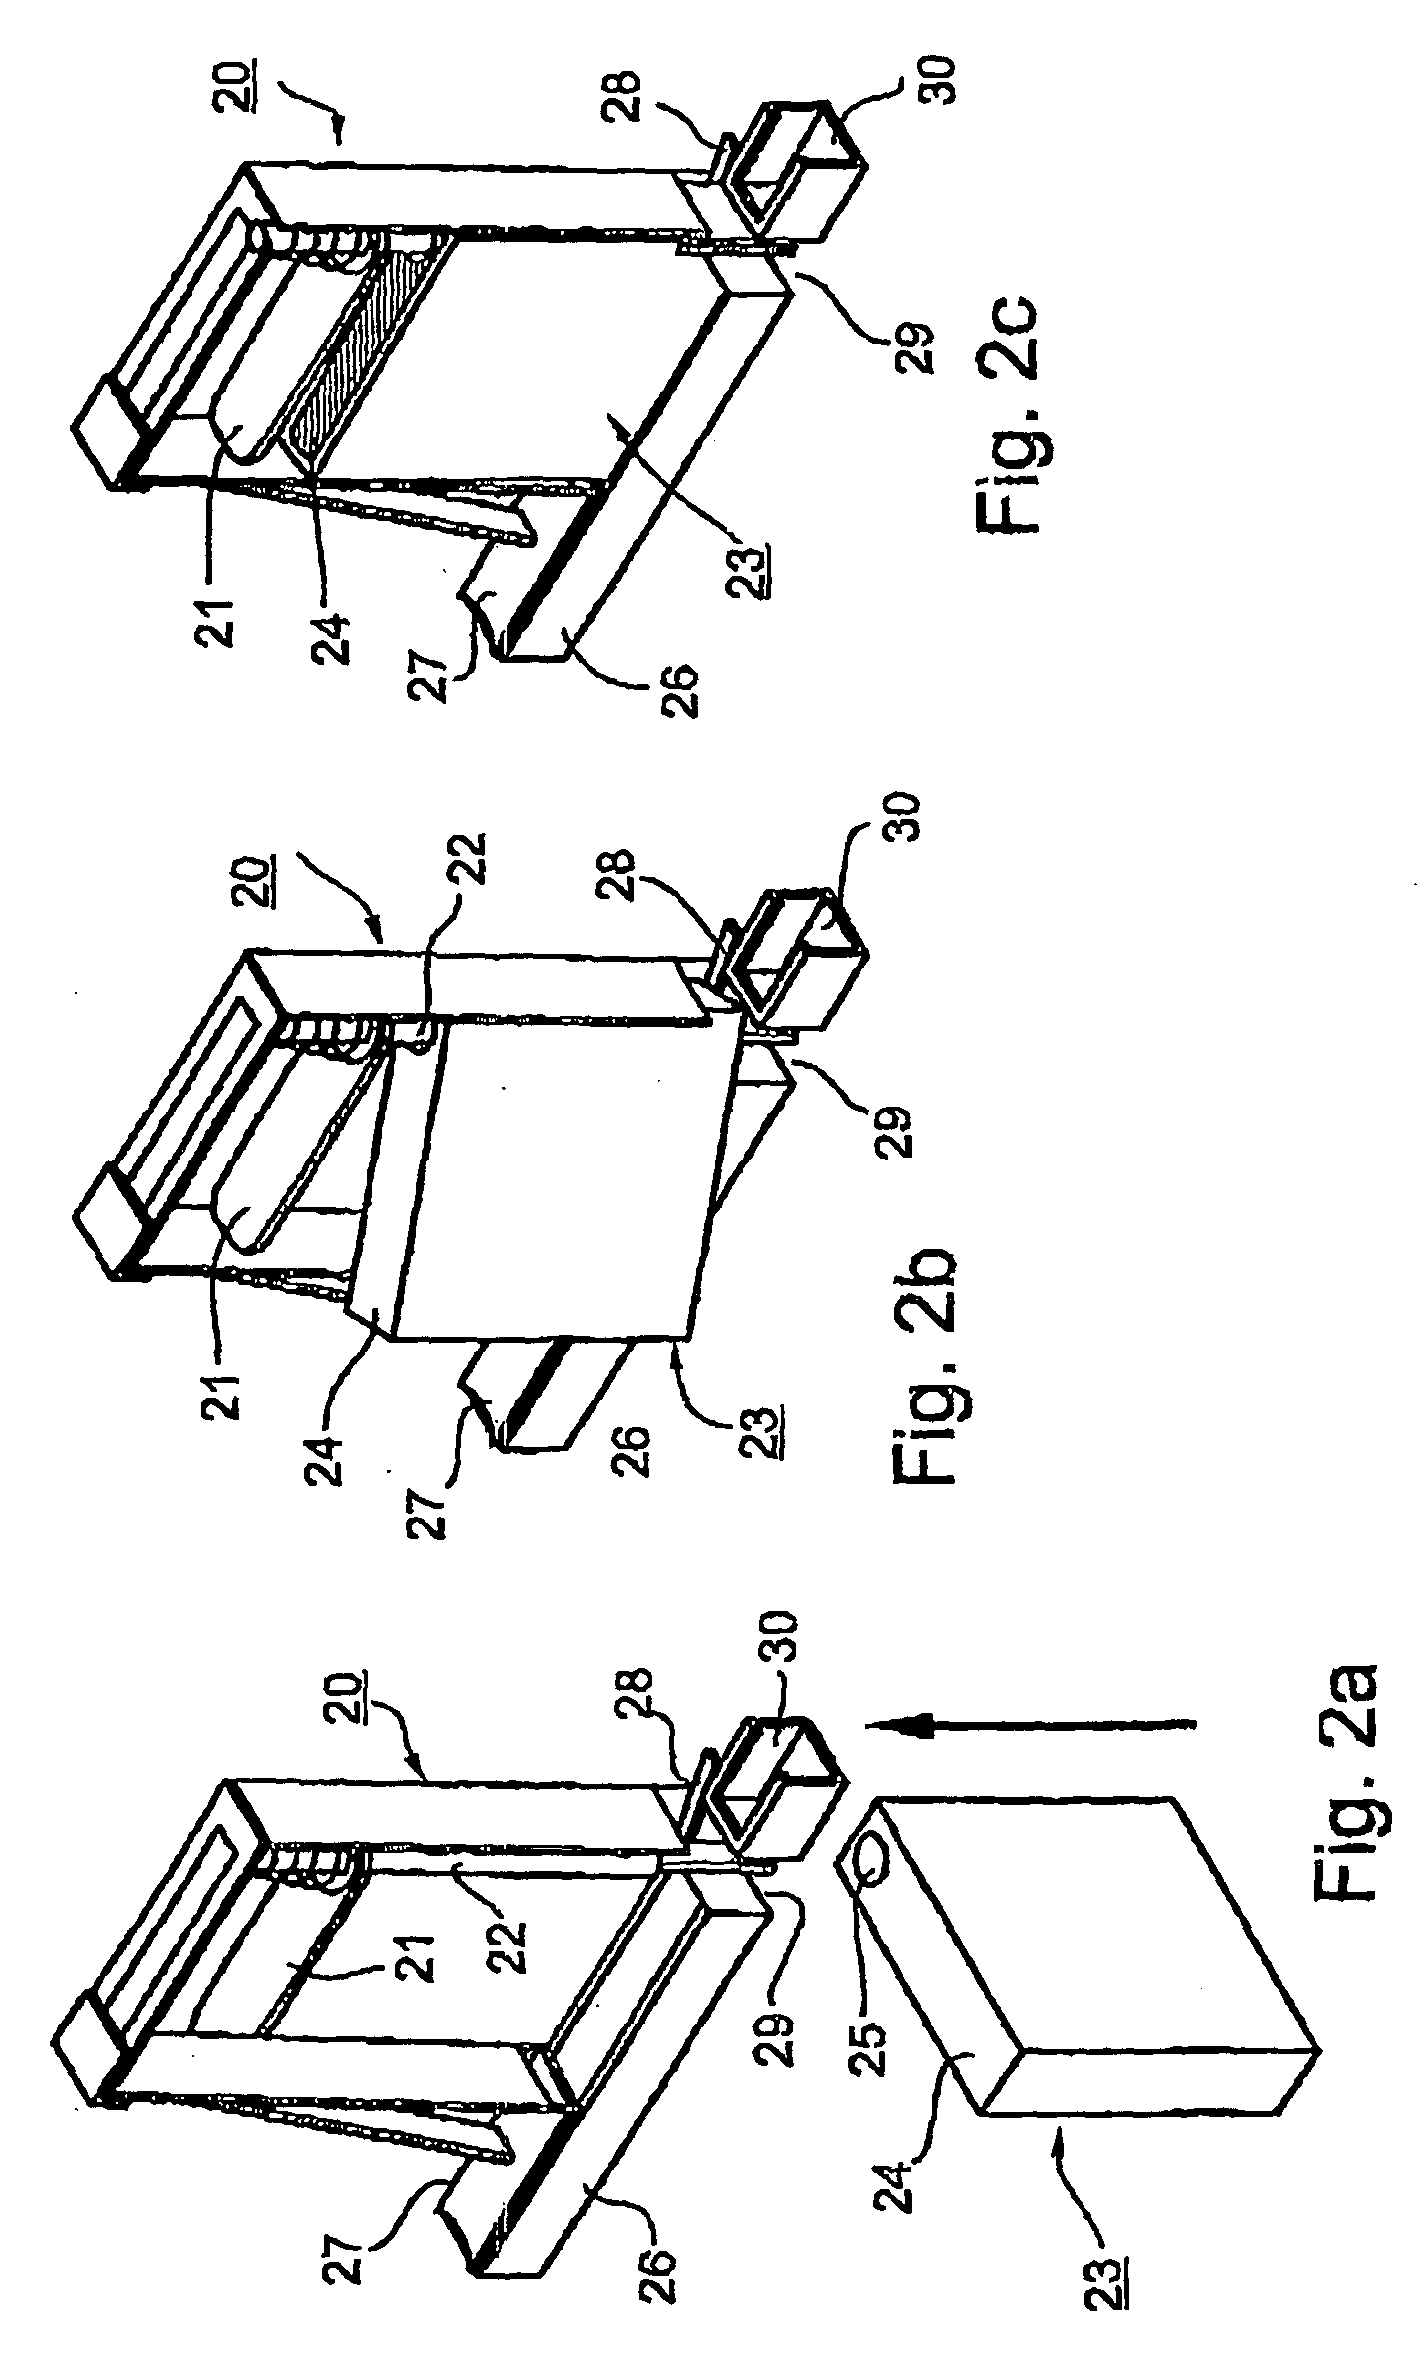 Spring-wire clip applicator and method, and spring wire clips useful therewith